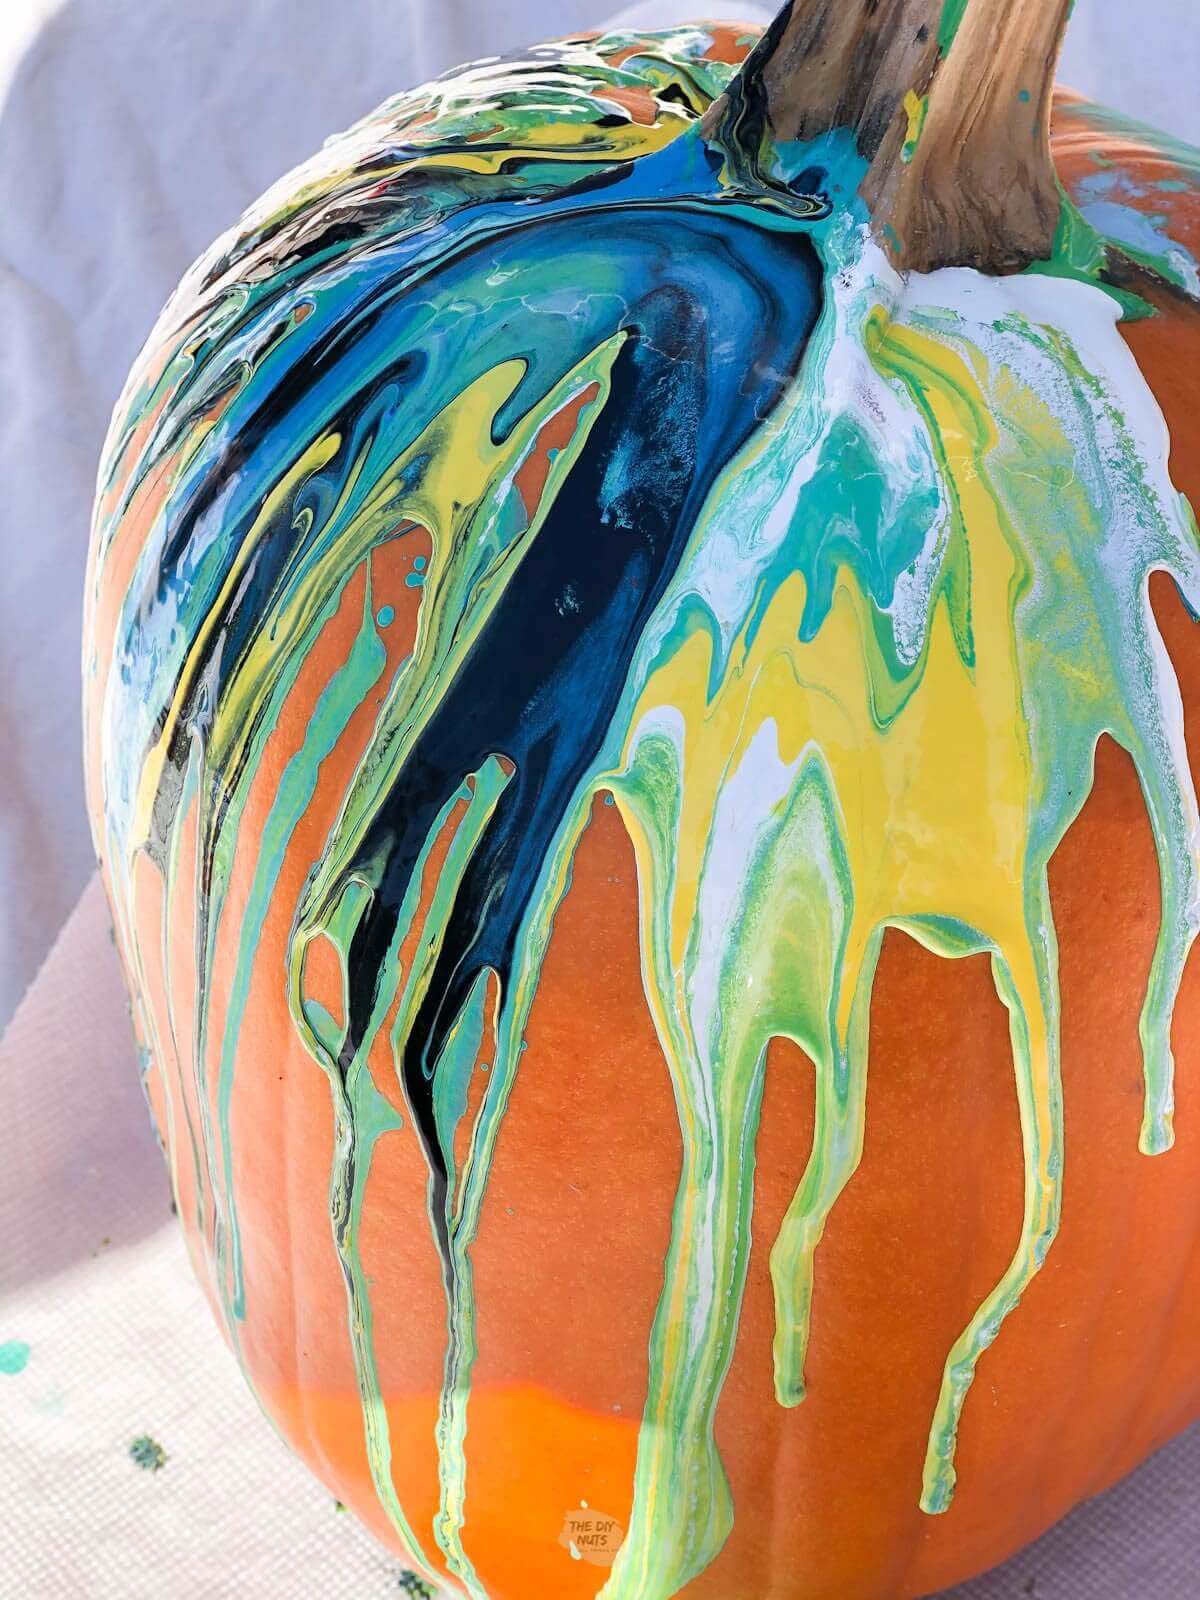 Paint pour pumpkin with blue, teal, yellow, white and black marble effect.